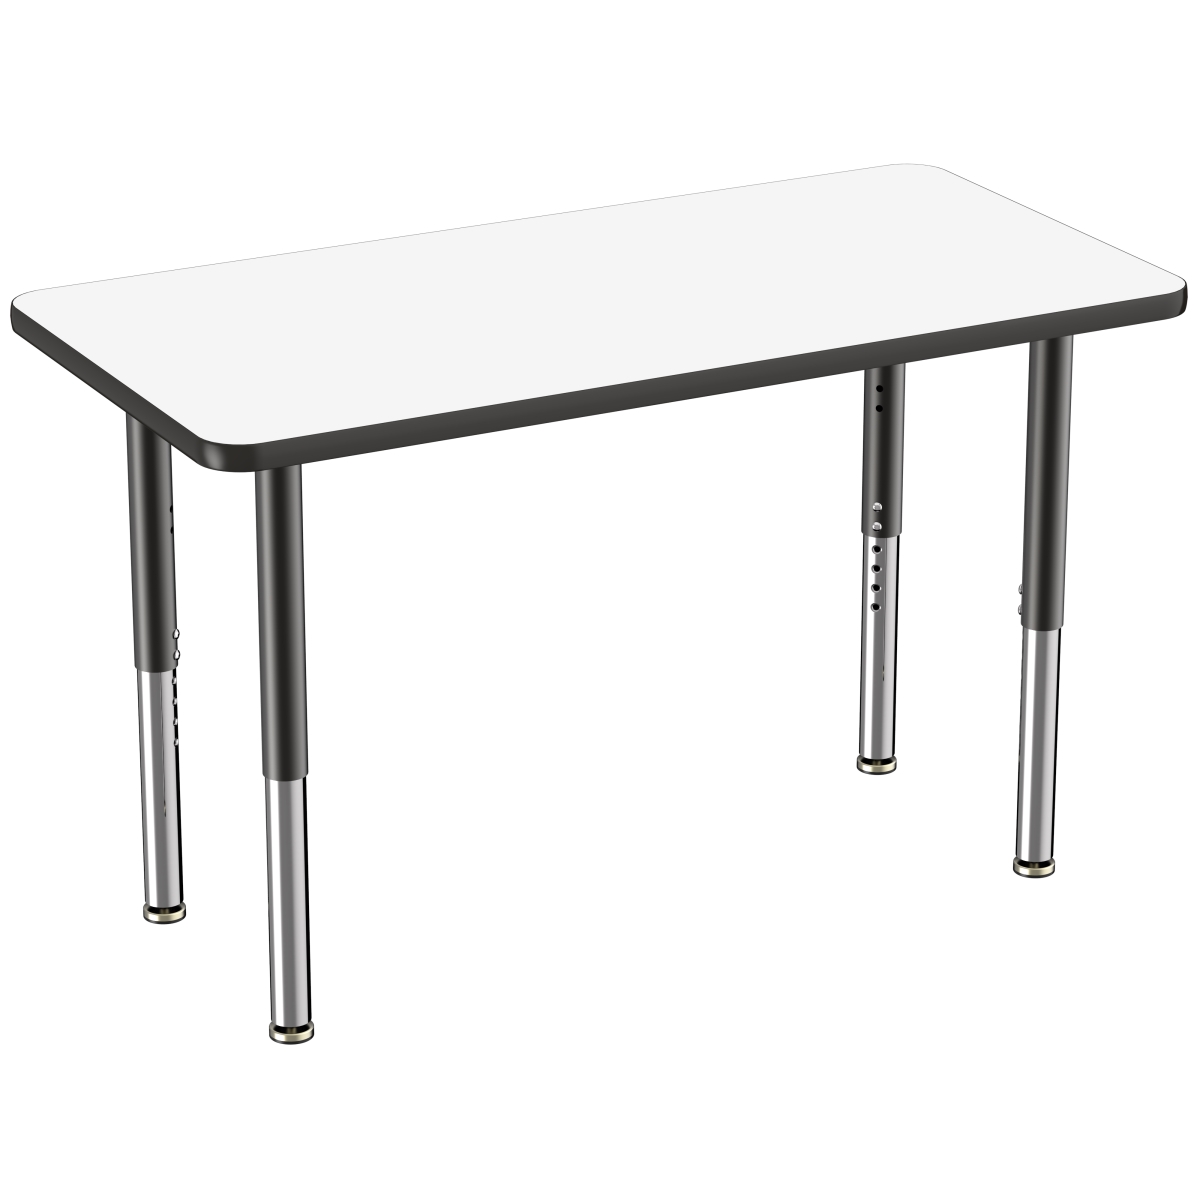 10163-debk 24 X 48 In. Rectangle Dry-erase Adjustable Activity Table With Super Leg - Black